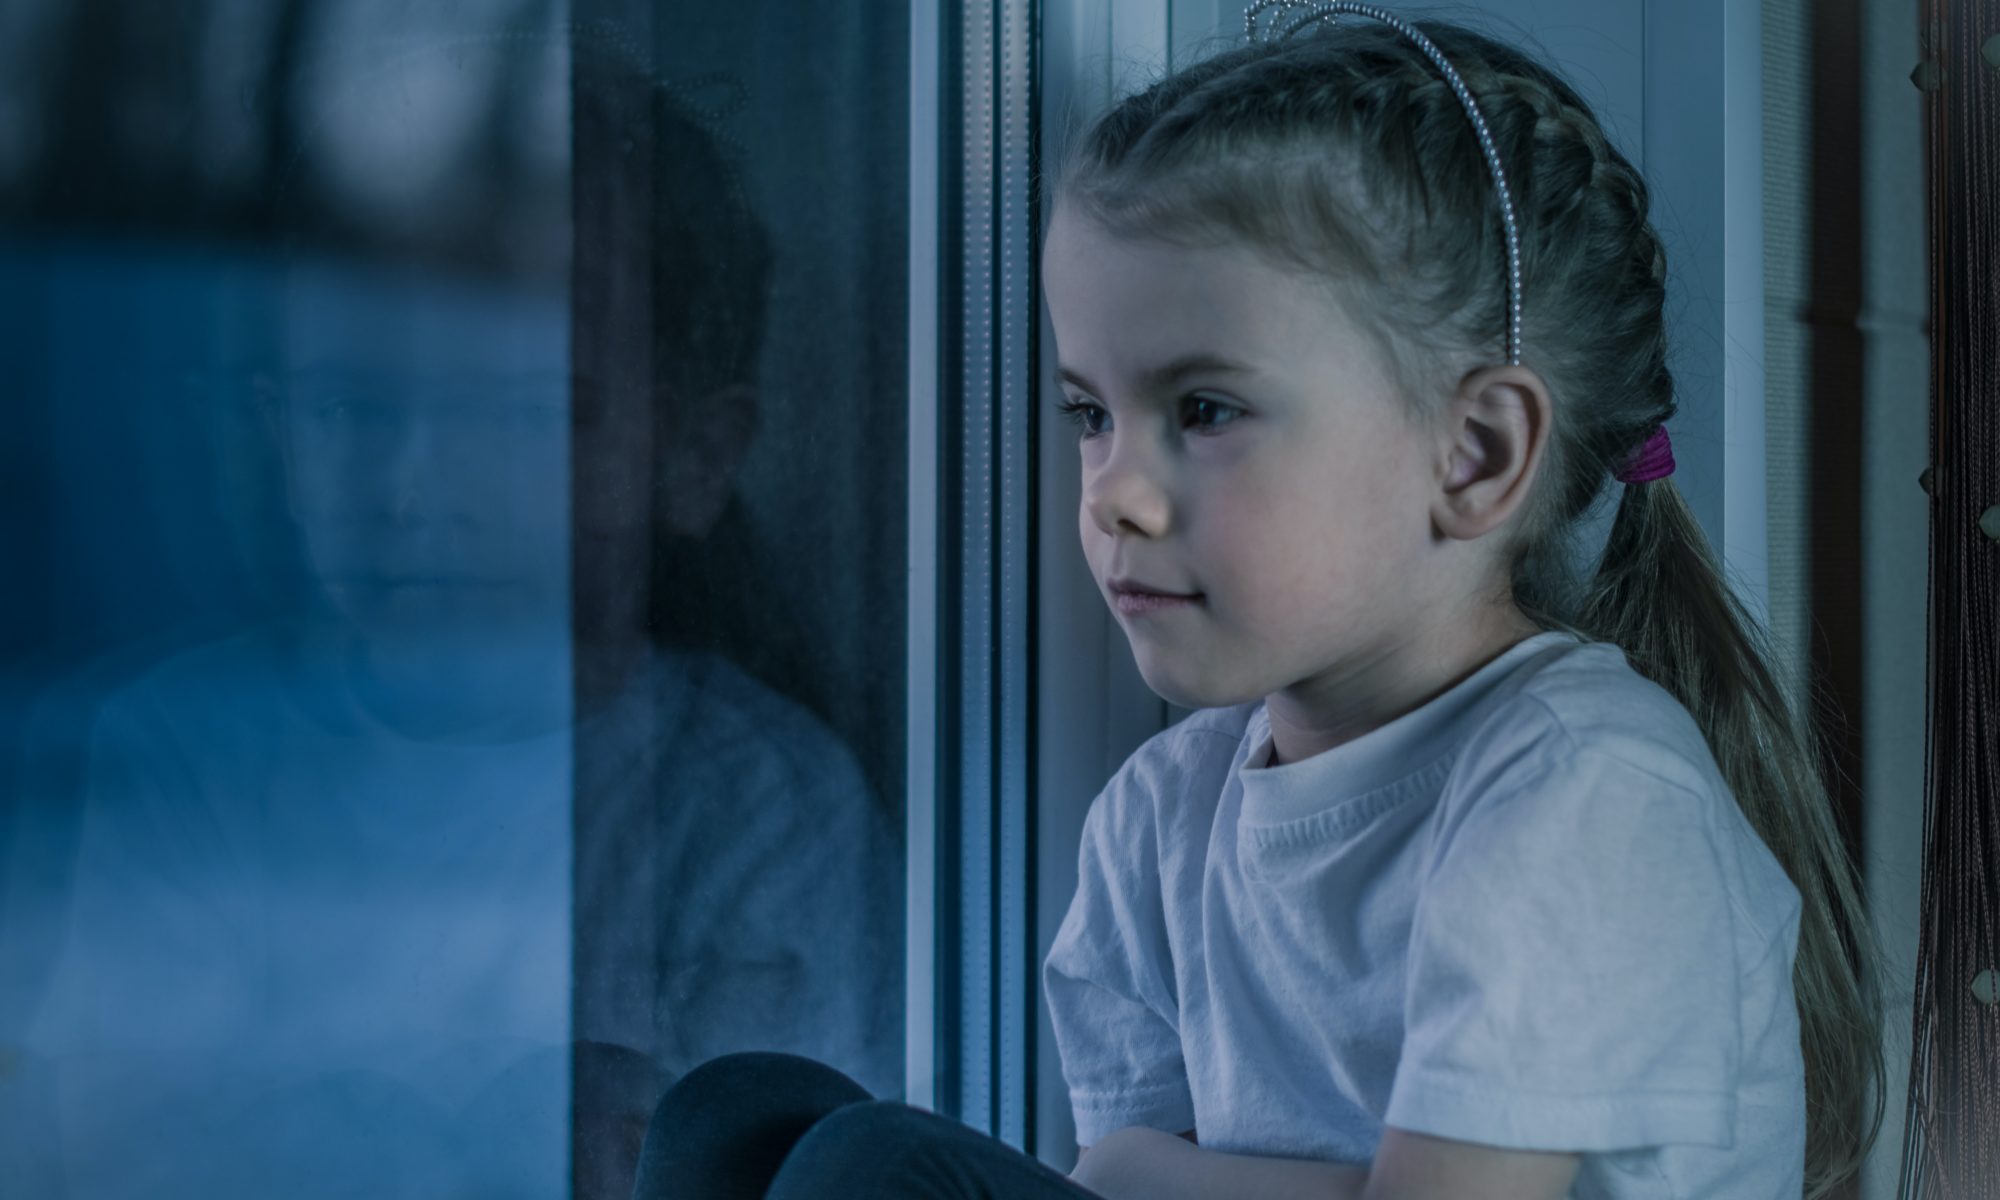 Sad young girl staring out of a window